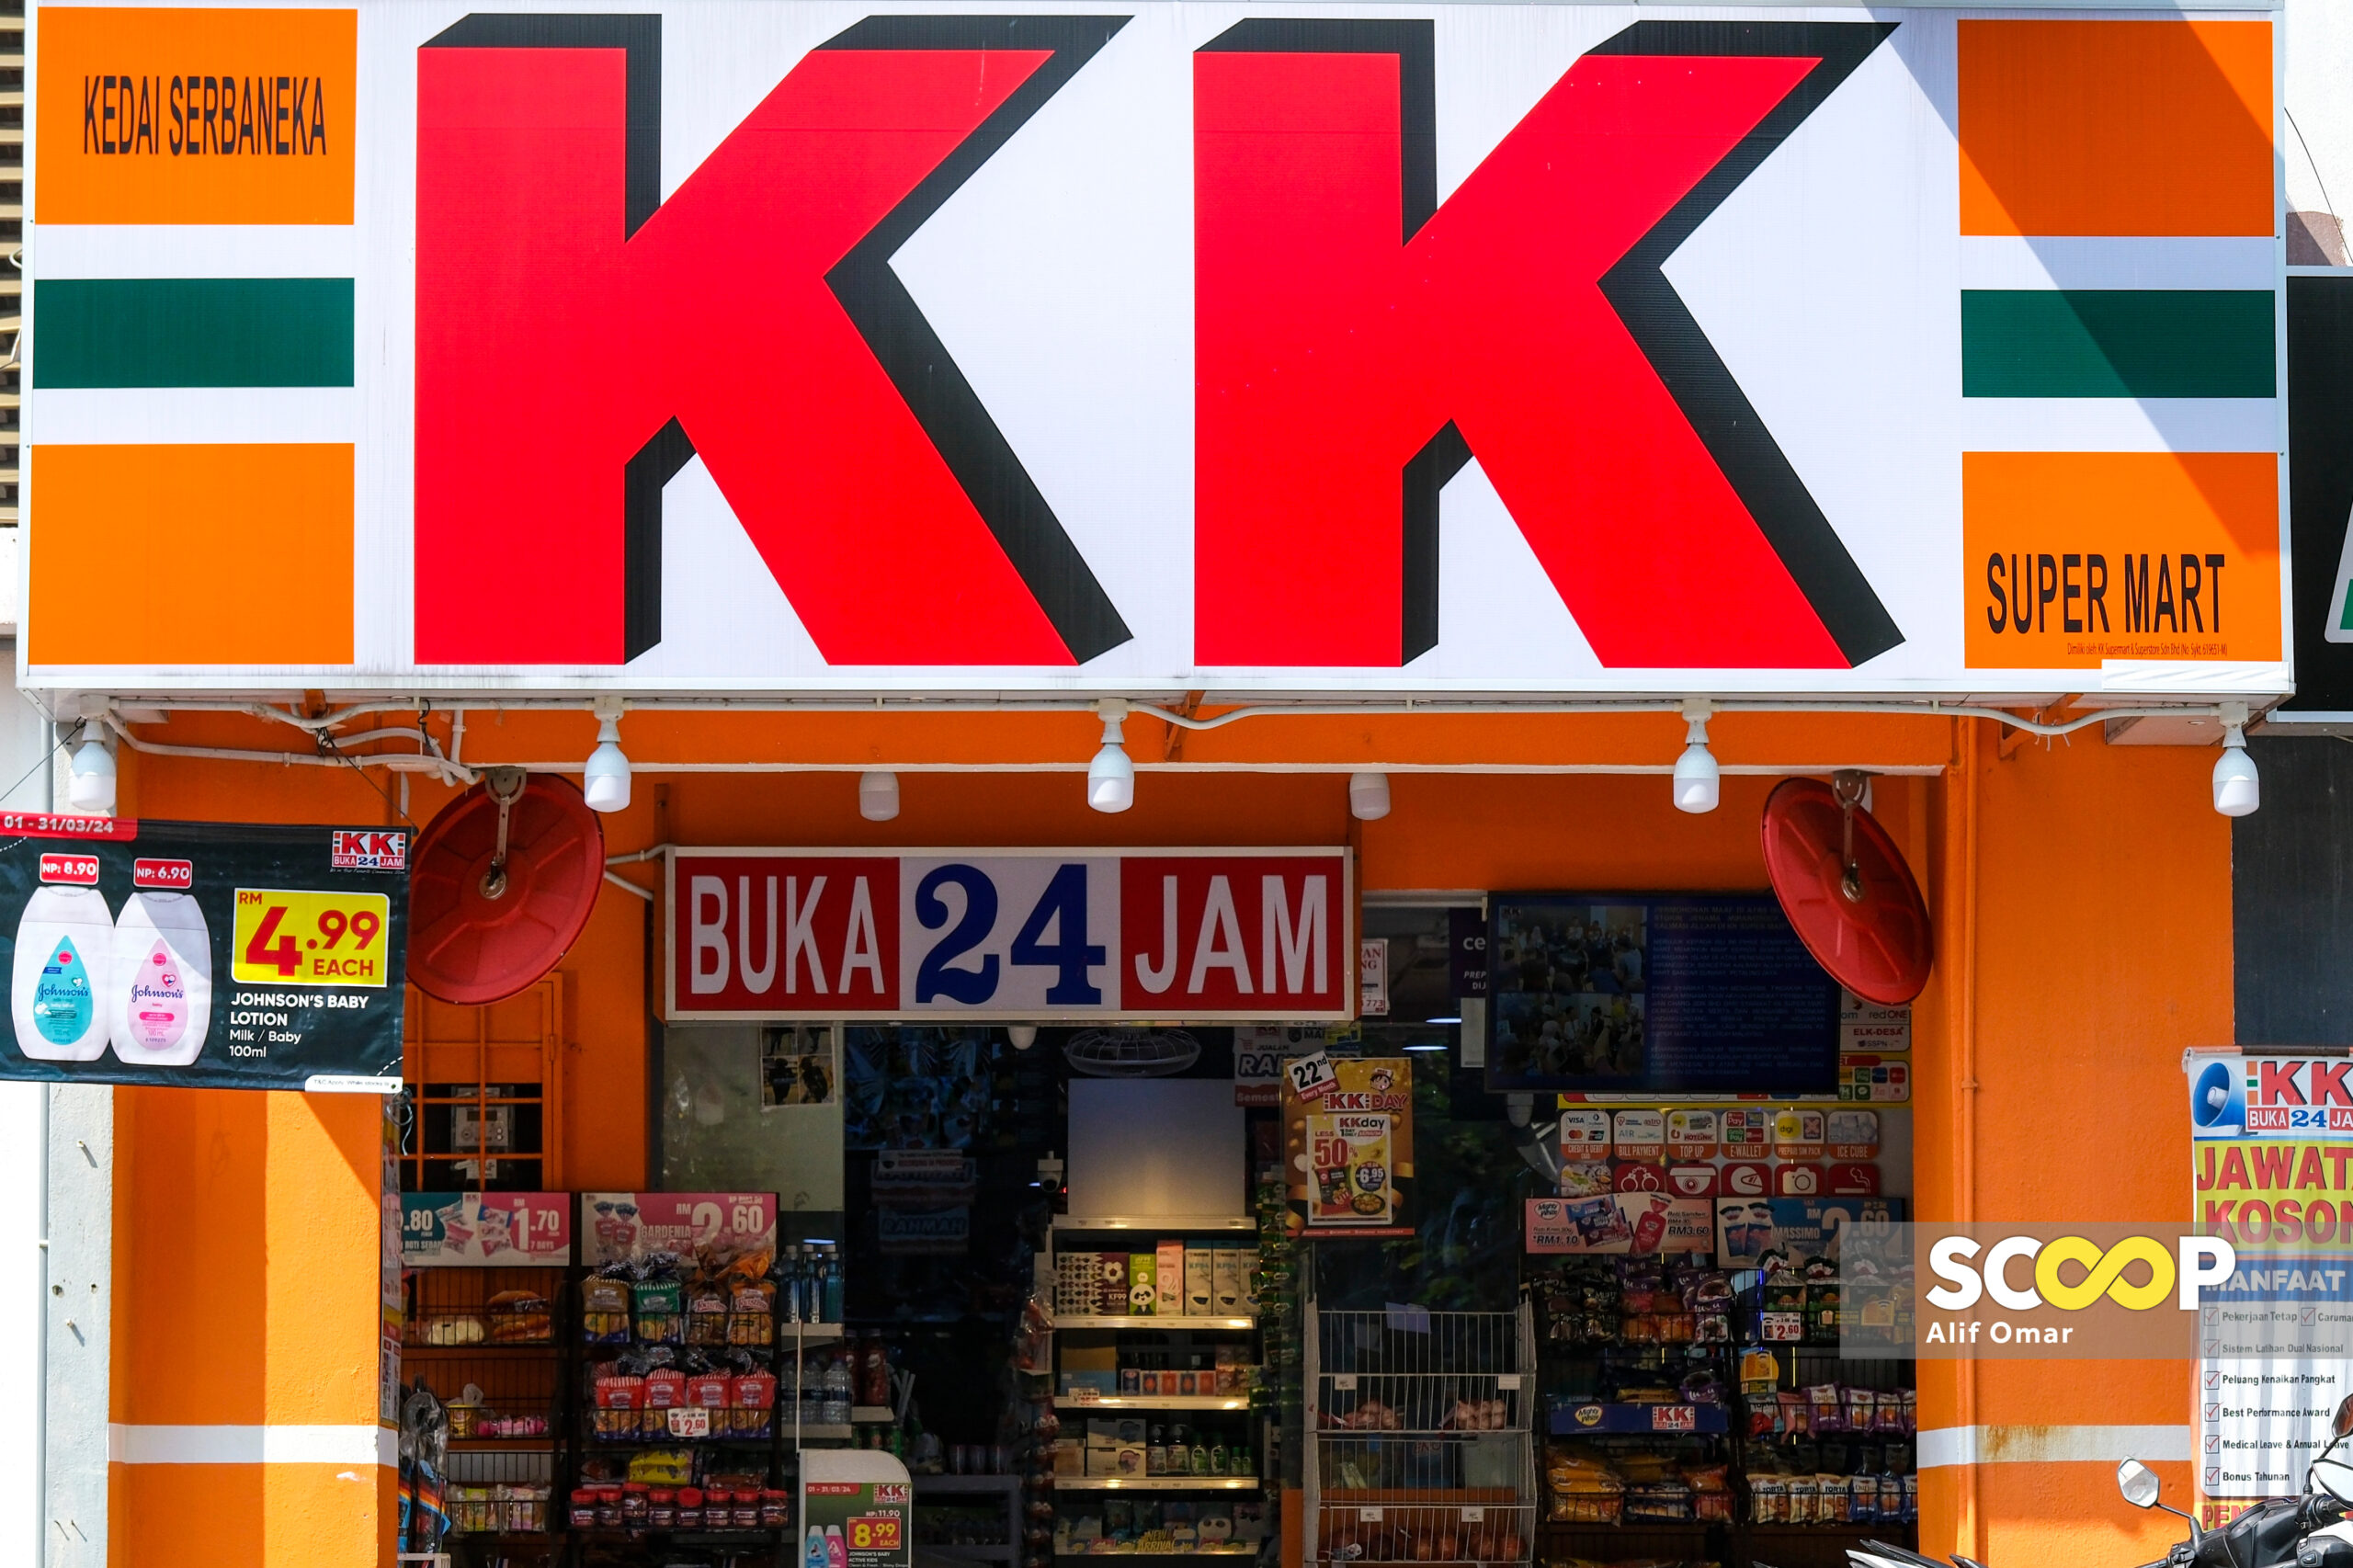 An overview of key players embroiled in KK Mart’s legal battles, boycotts